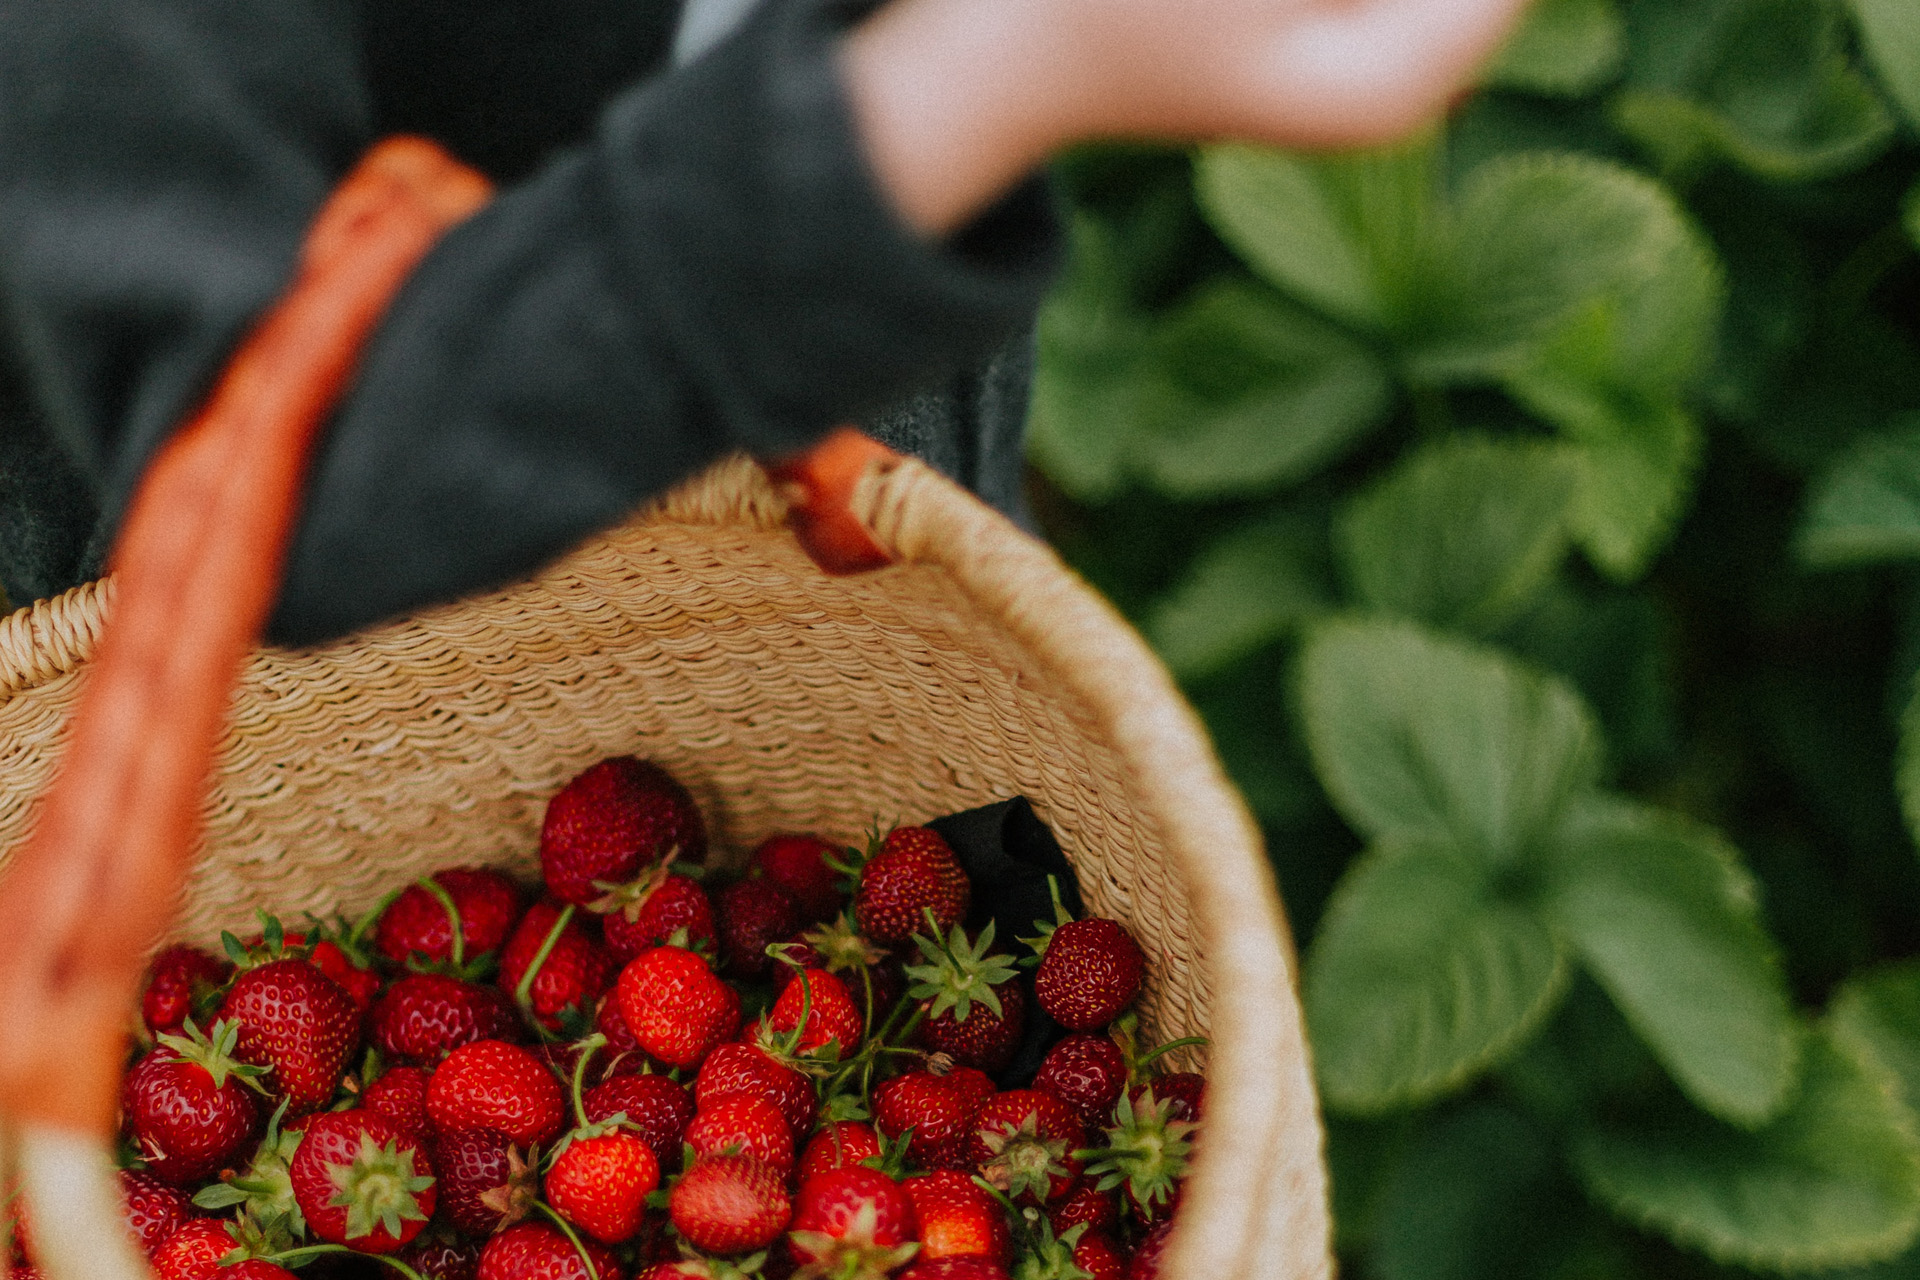 strawberry picking into a basket